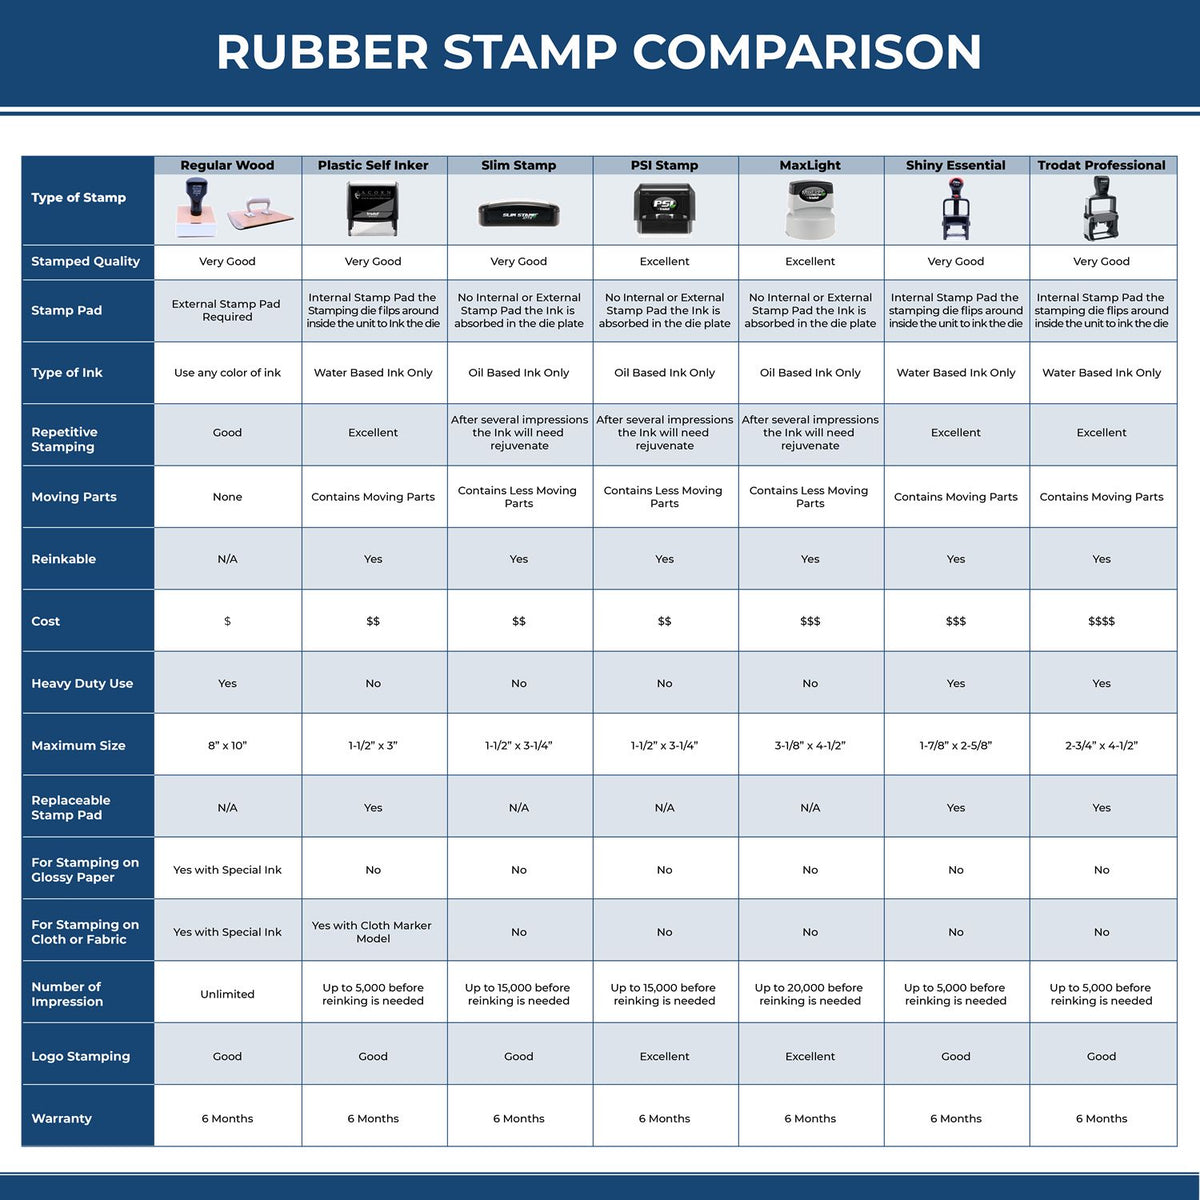 Large Self-Inking Bold FYI Stamp 4972S Rubber Stamp Comparison